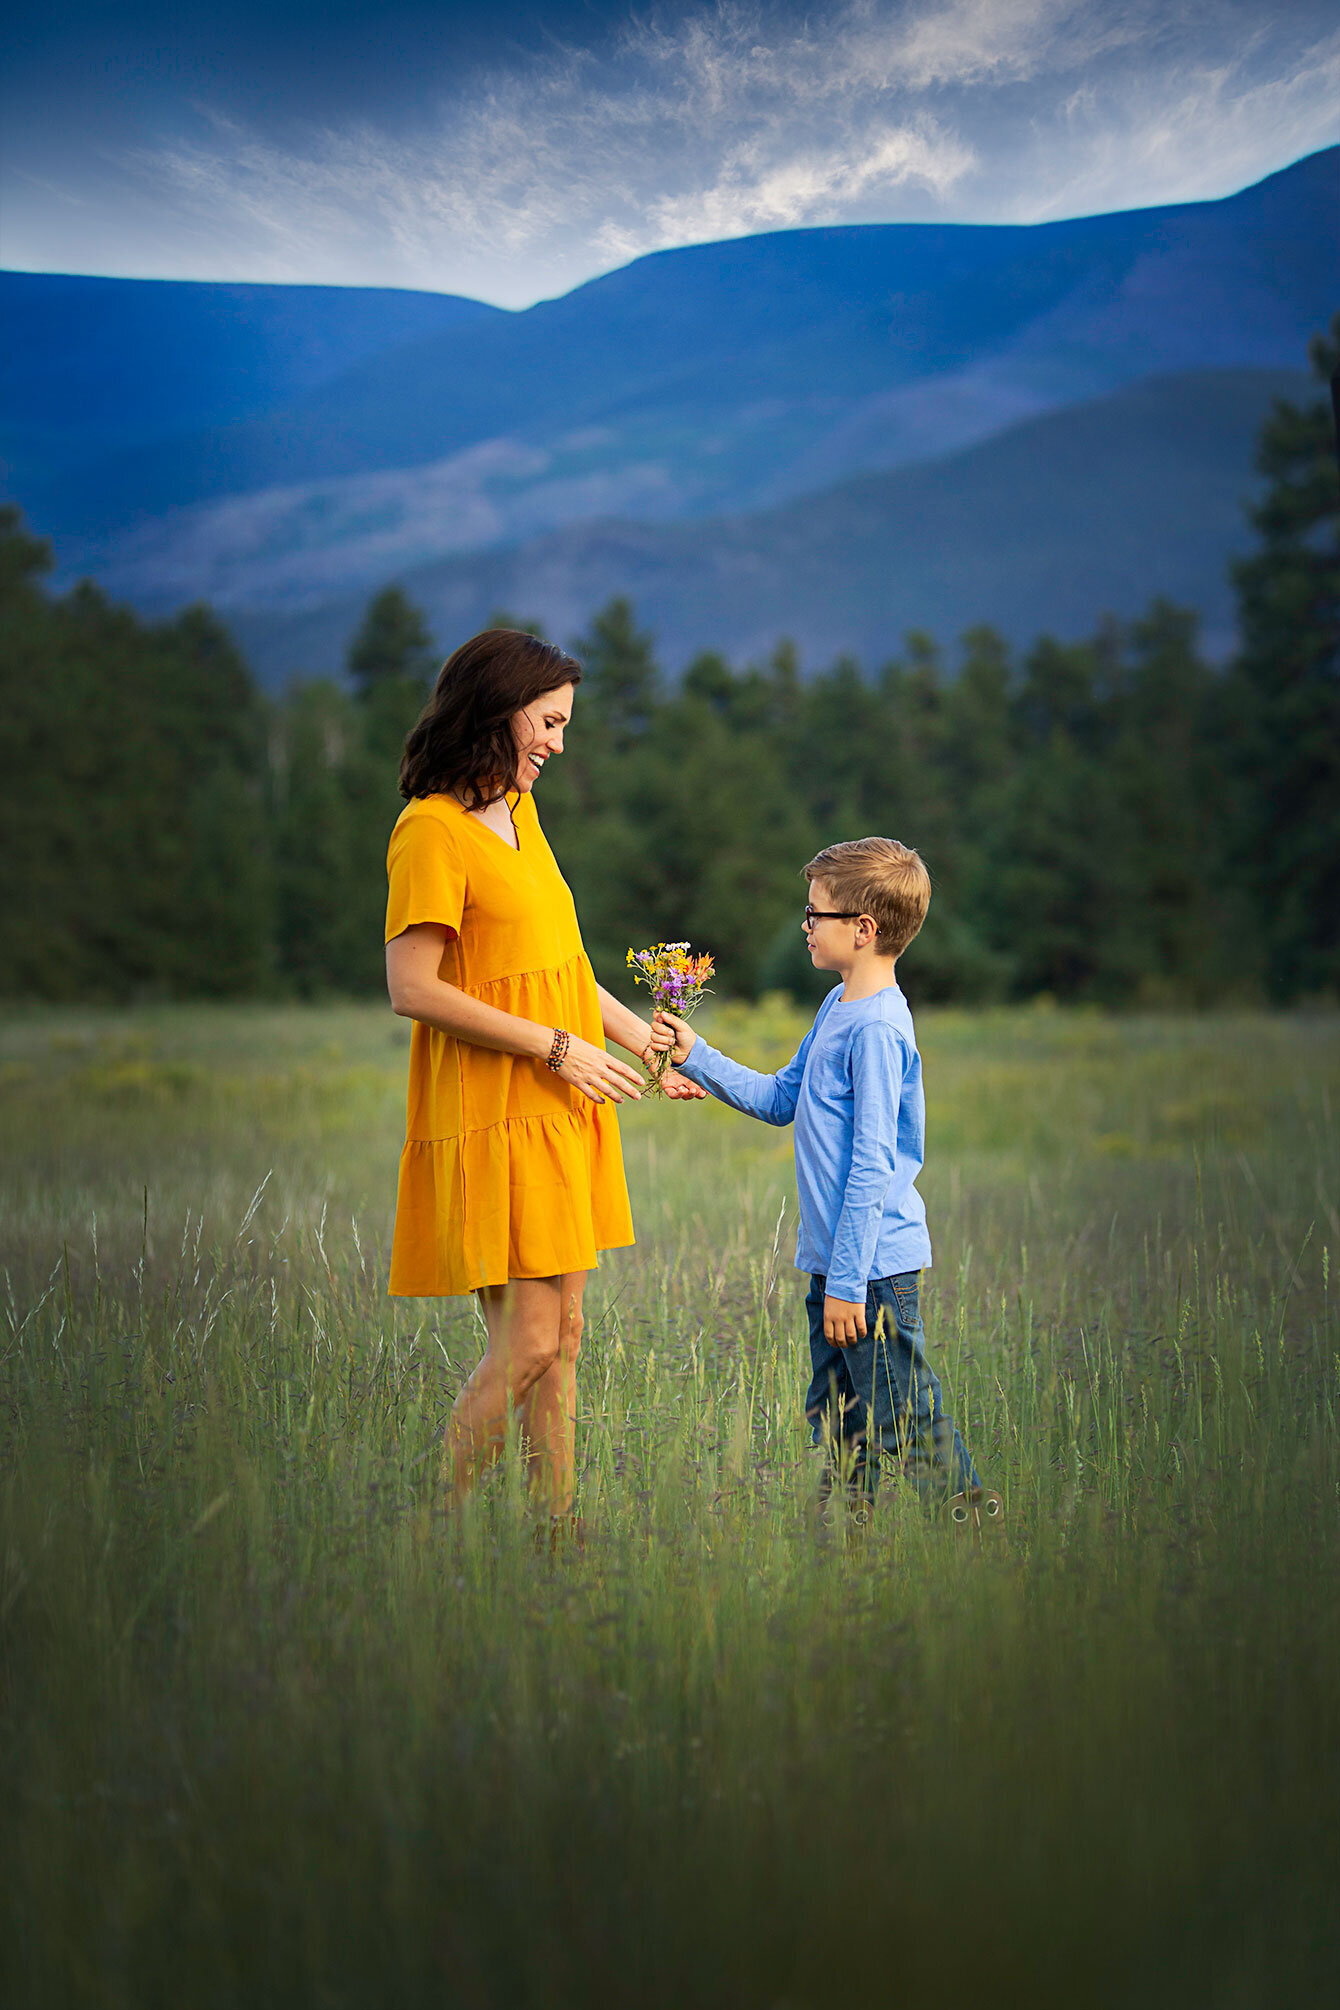 mother-son-flowers-mothers-day-colorado-mountains-mountain-sunset-family-landscape-view-south-forks-Rio-Grande-Club